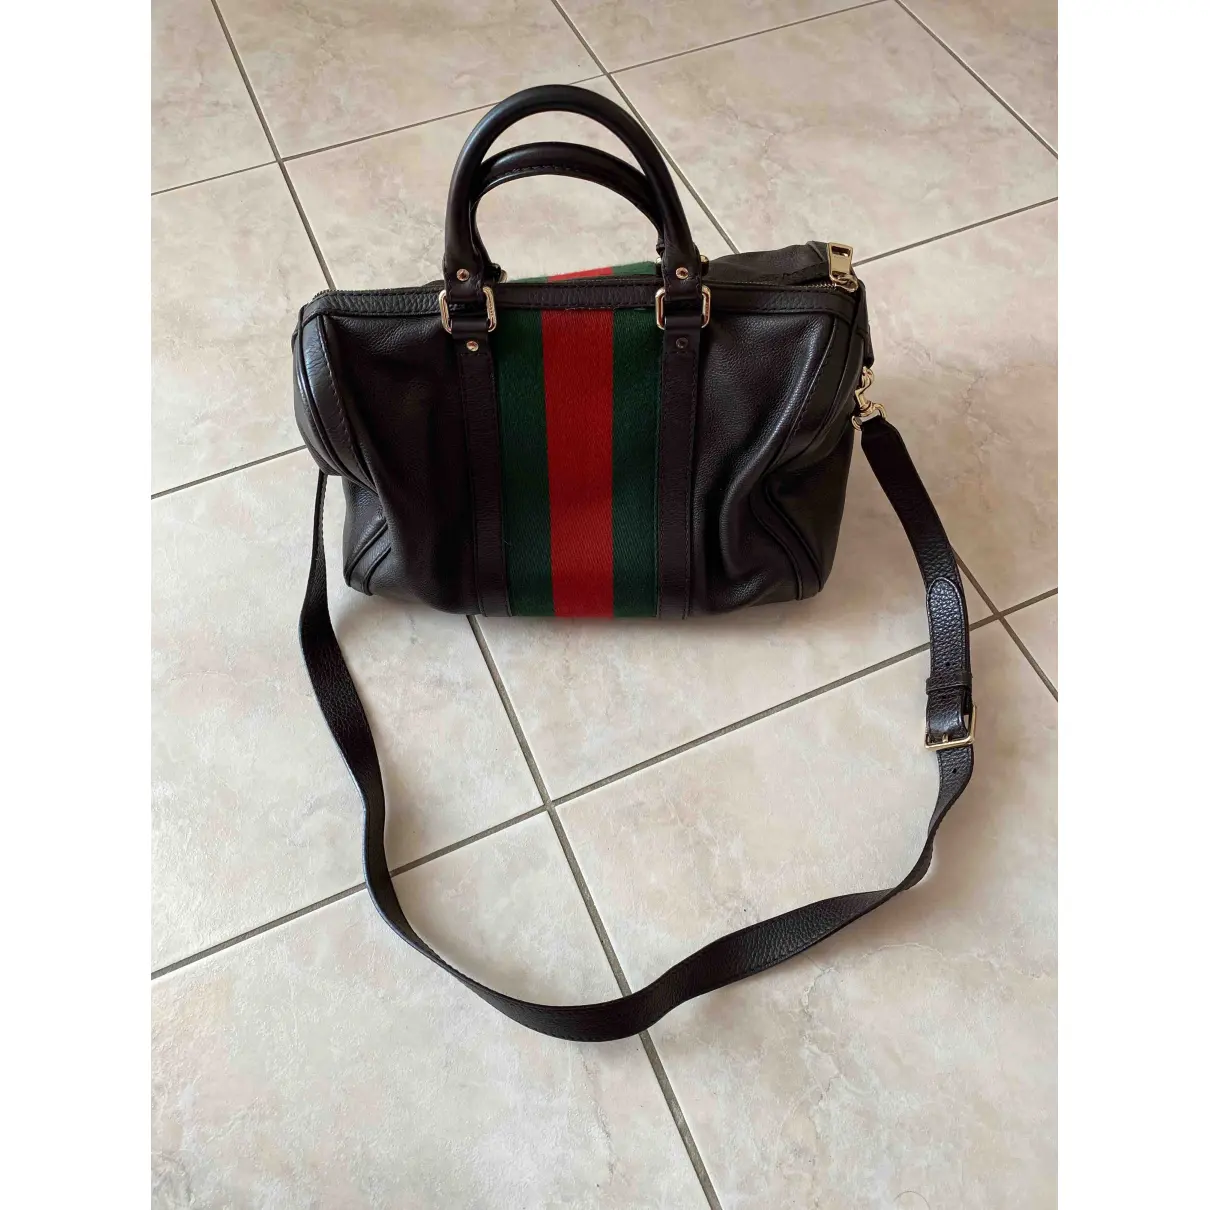 Buy Gucci Leather bowling bag online